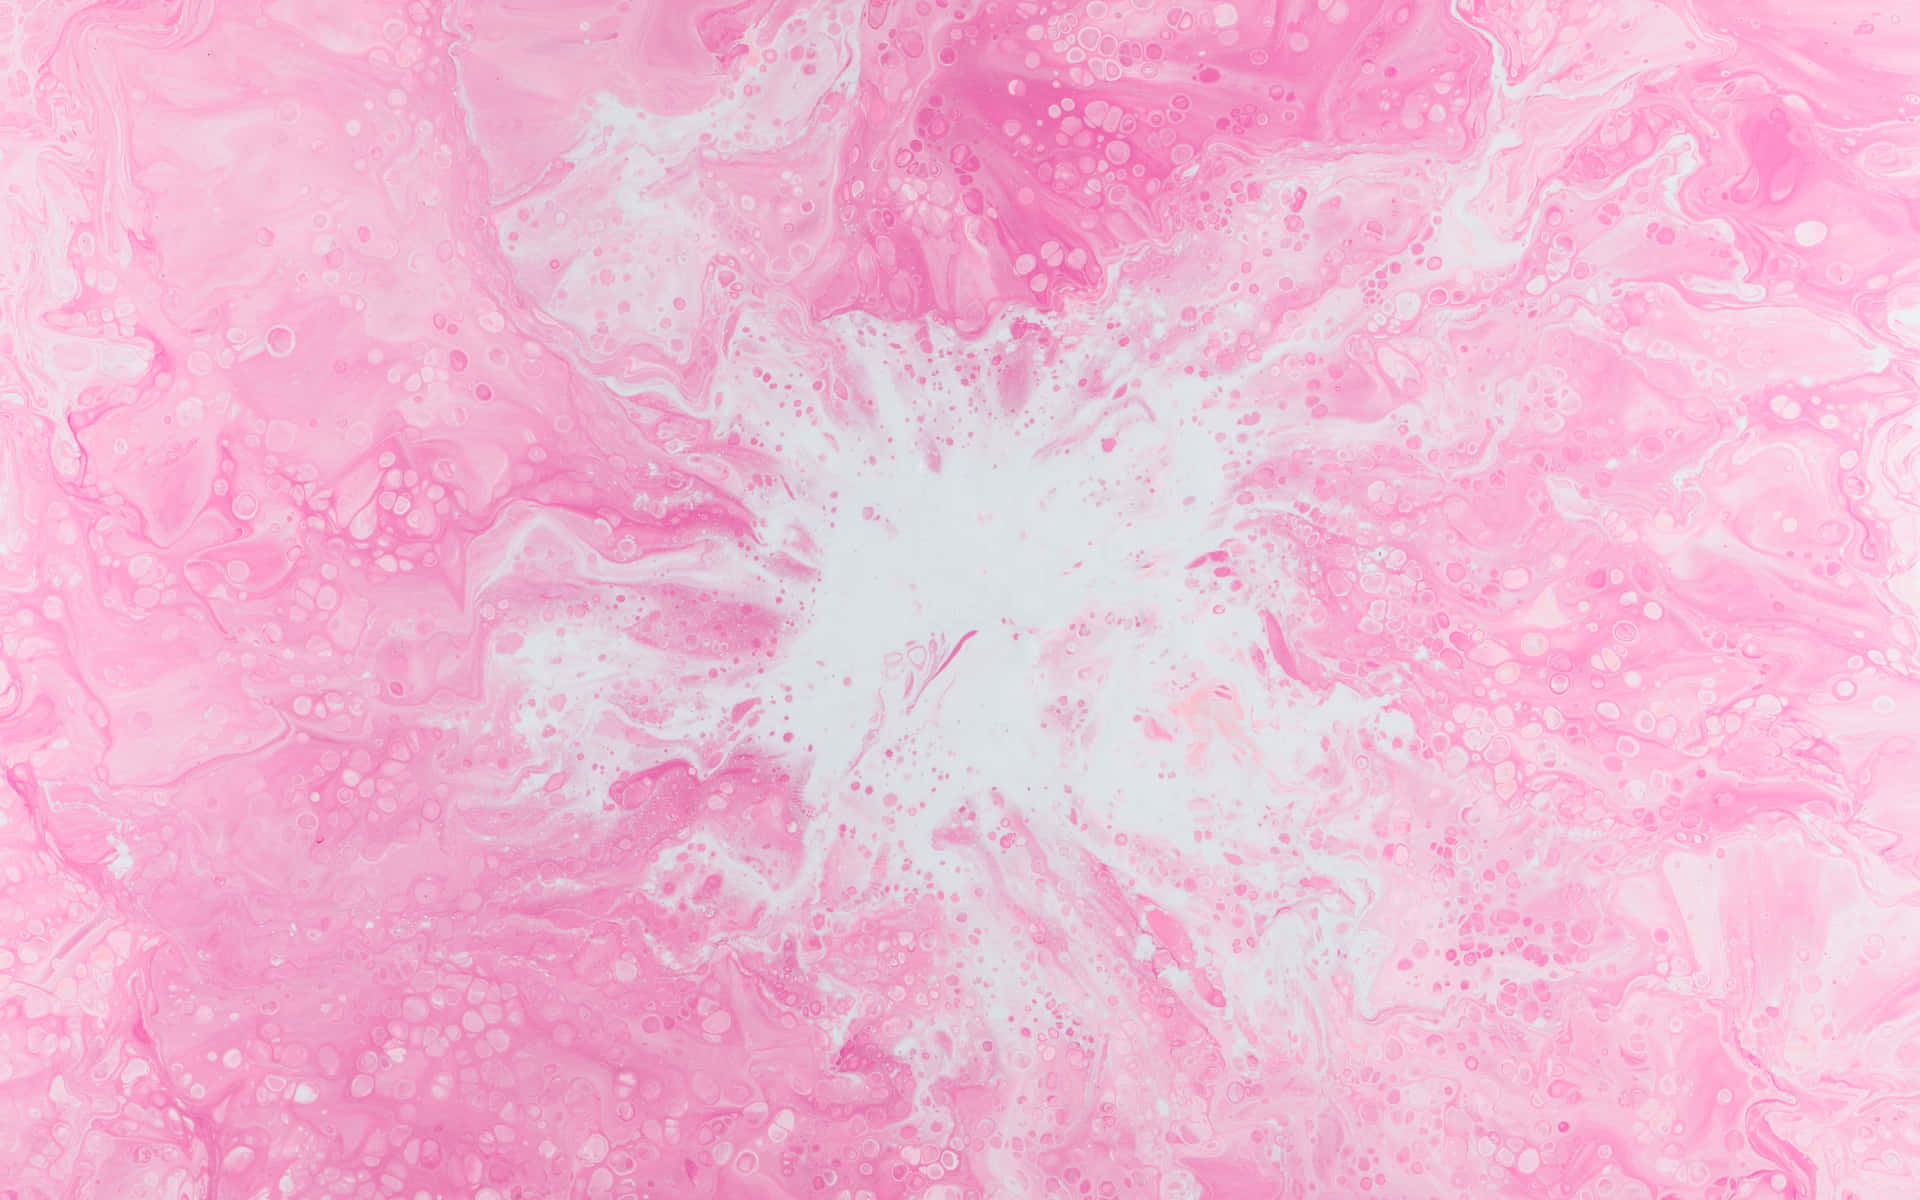 A vibrant pink abstract background.